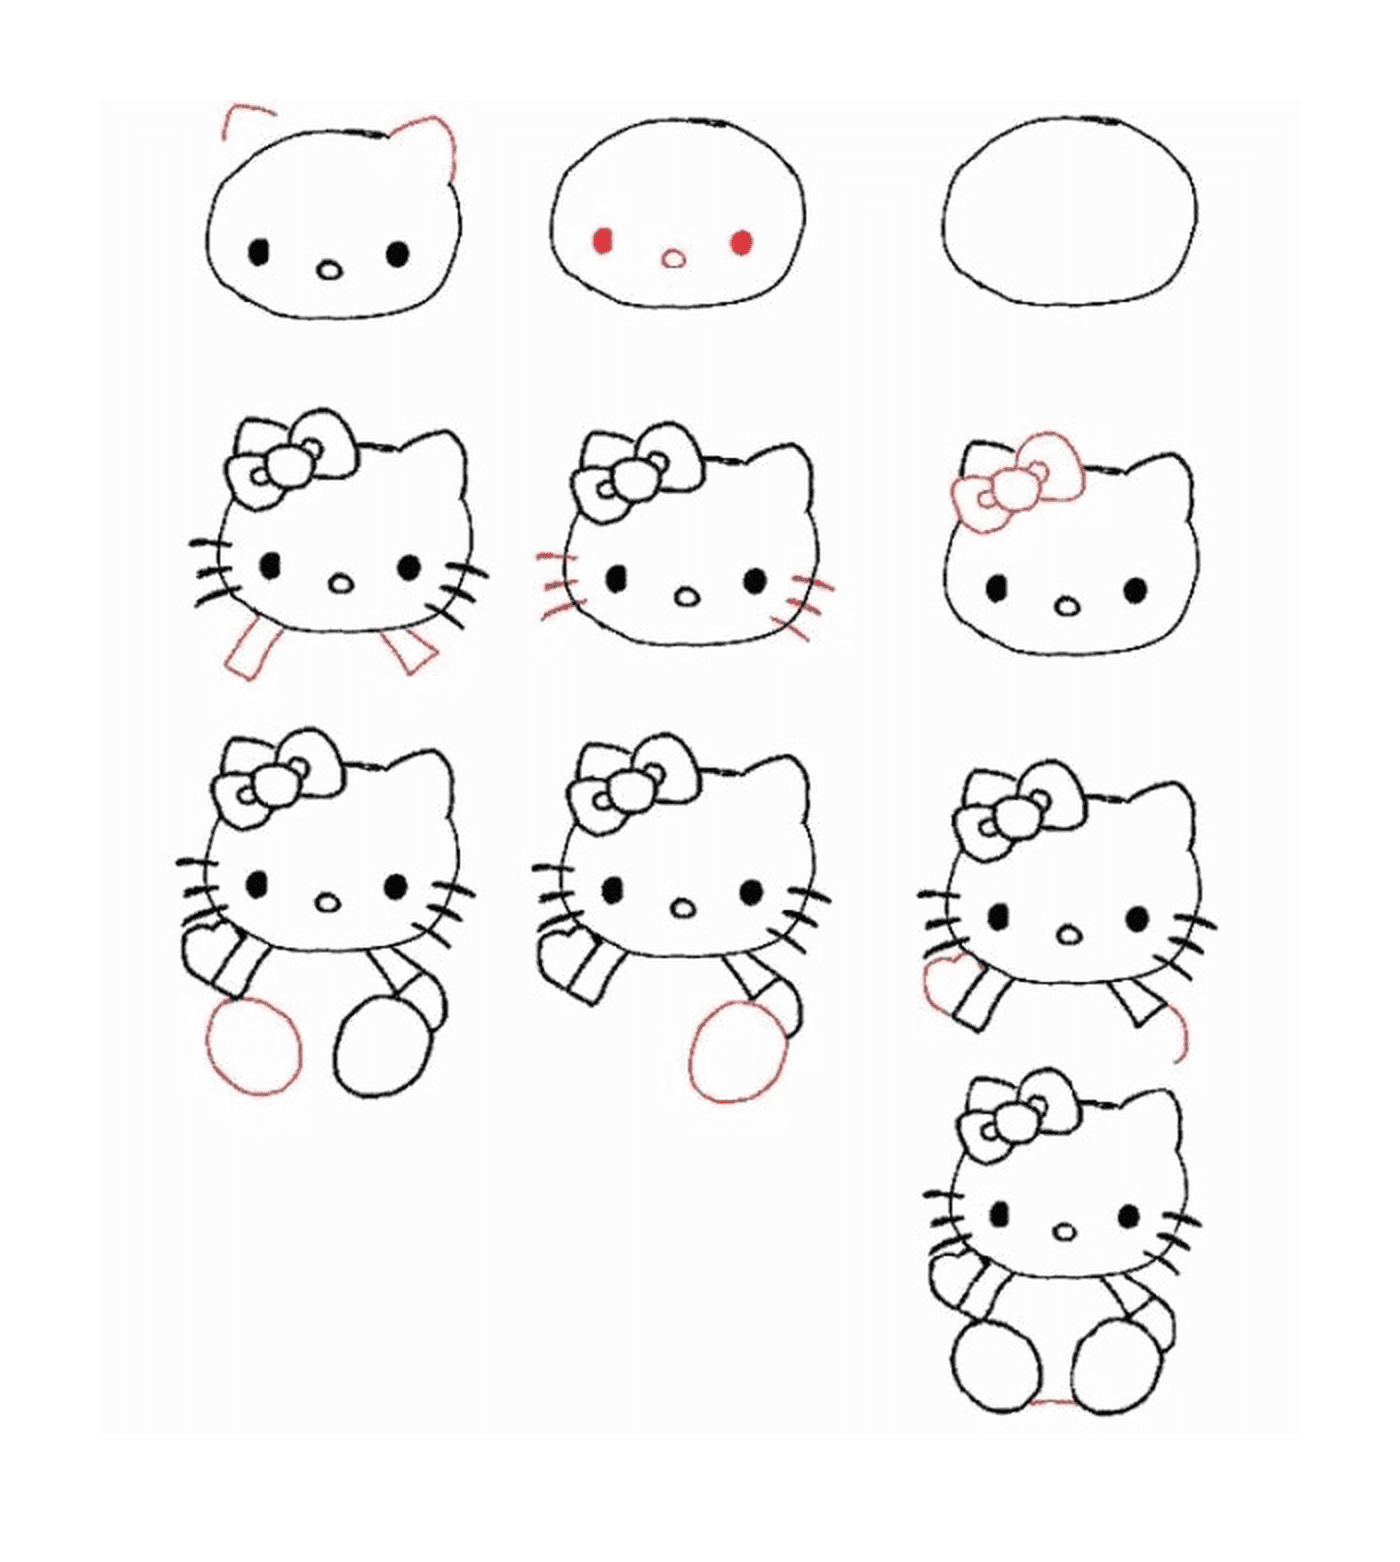  Step by step instructions on how to draw Hello Kitty 